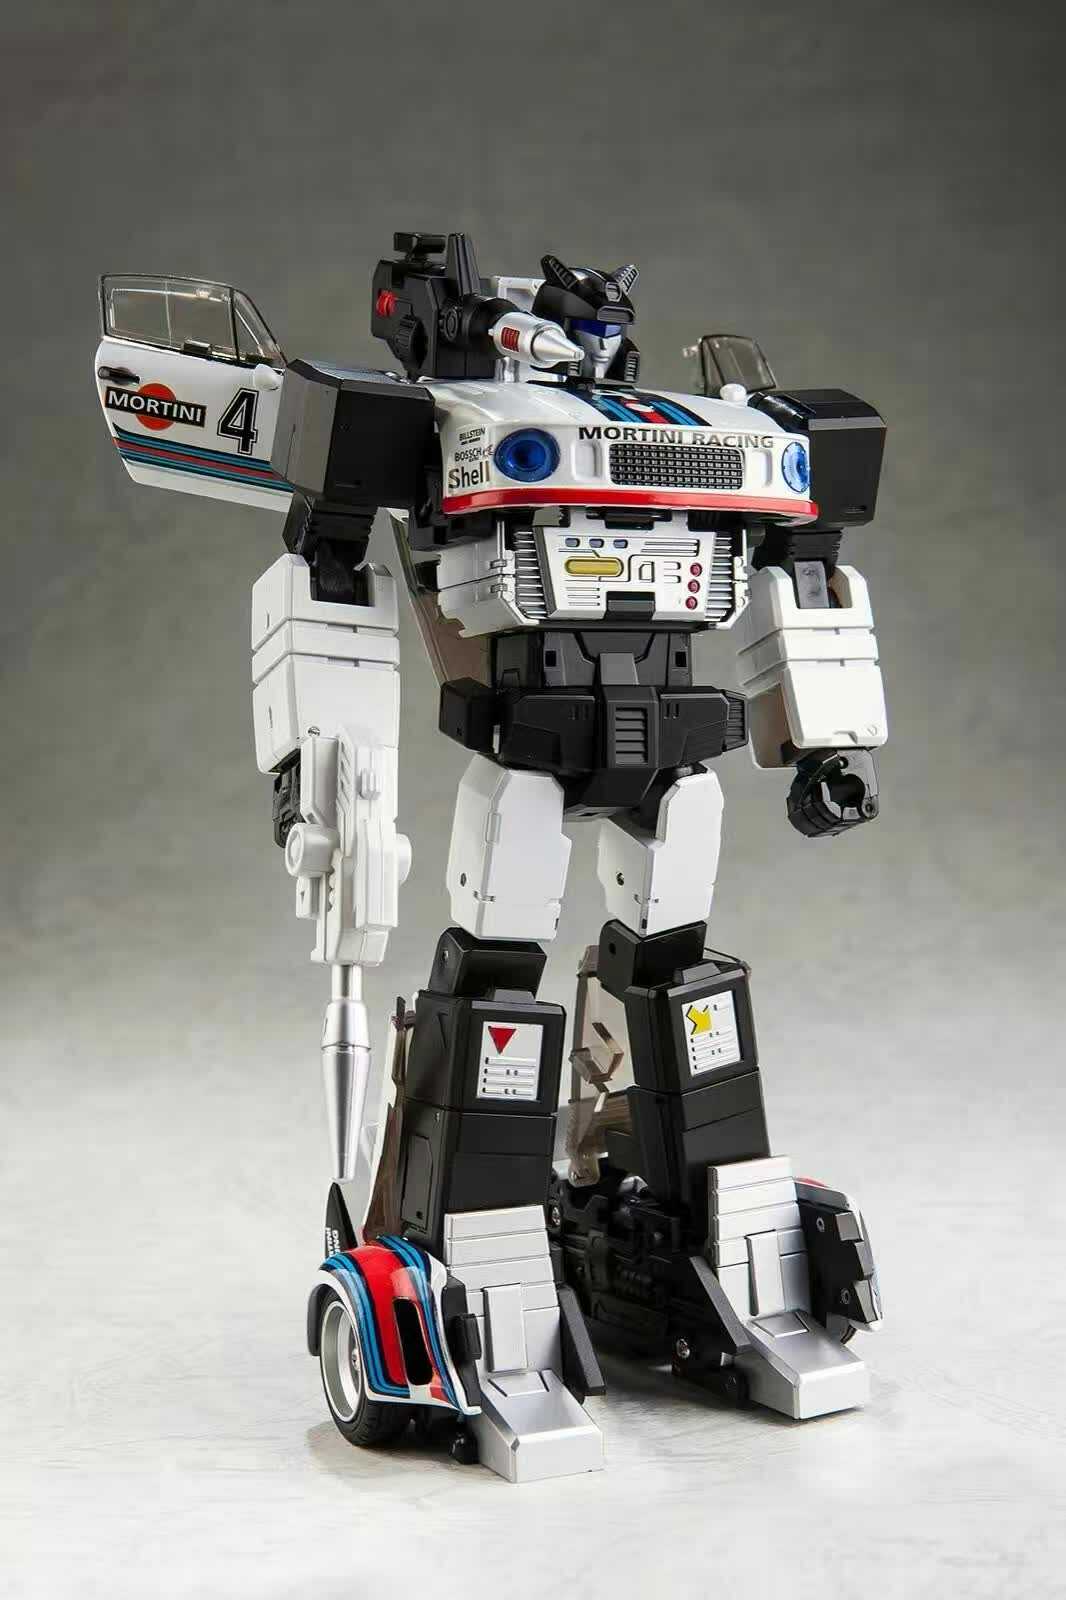 New Transformers Toys Zeta EX-03 Jazz G1 MP Scale action figure toy instock 